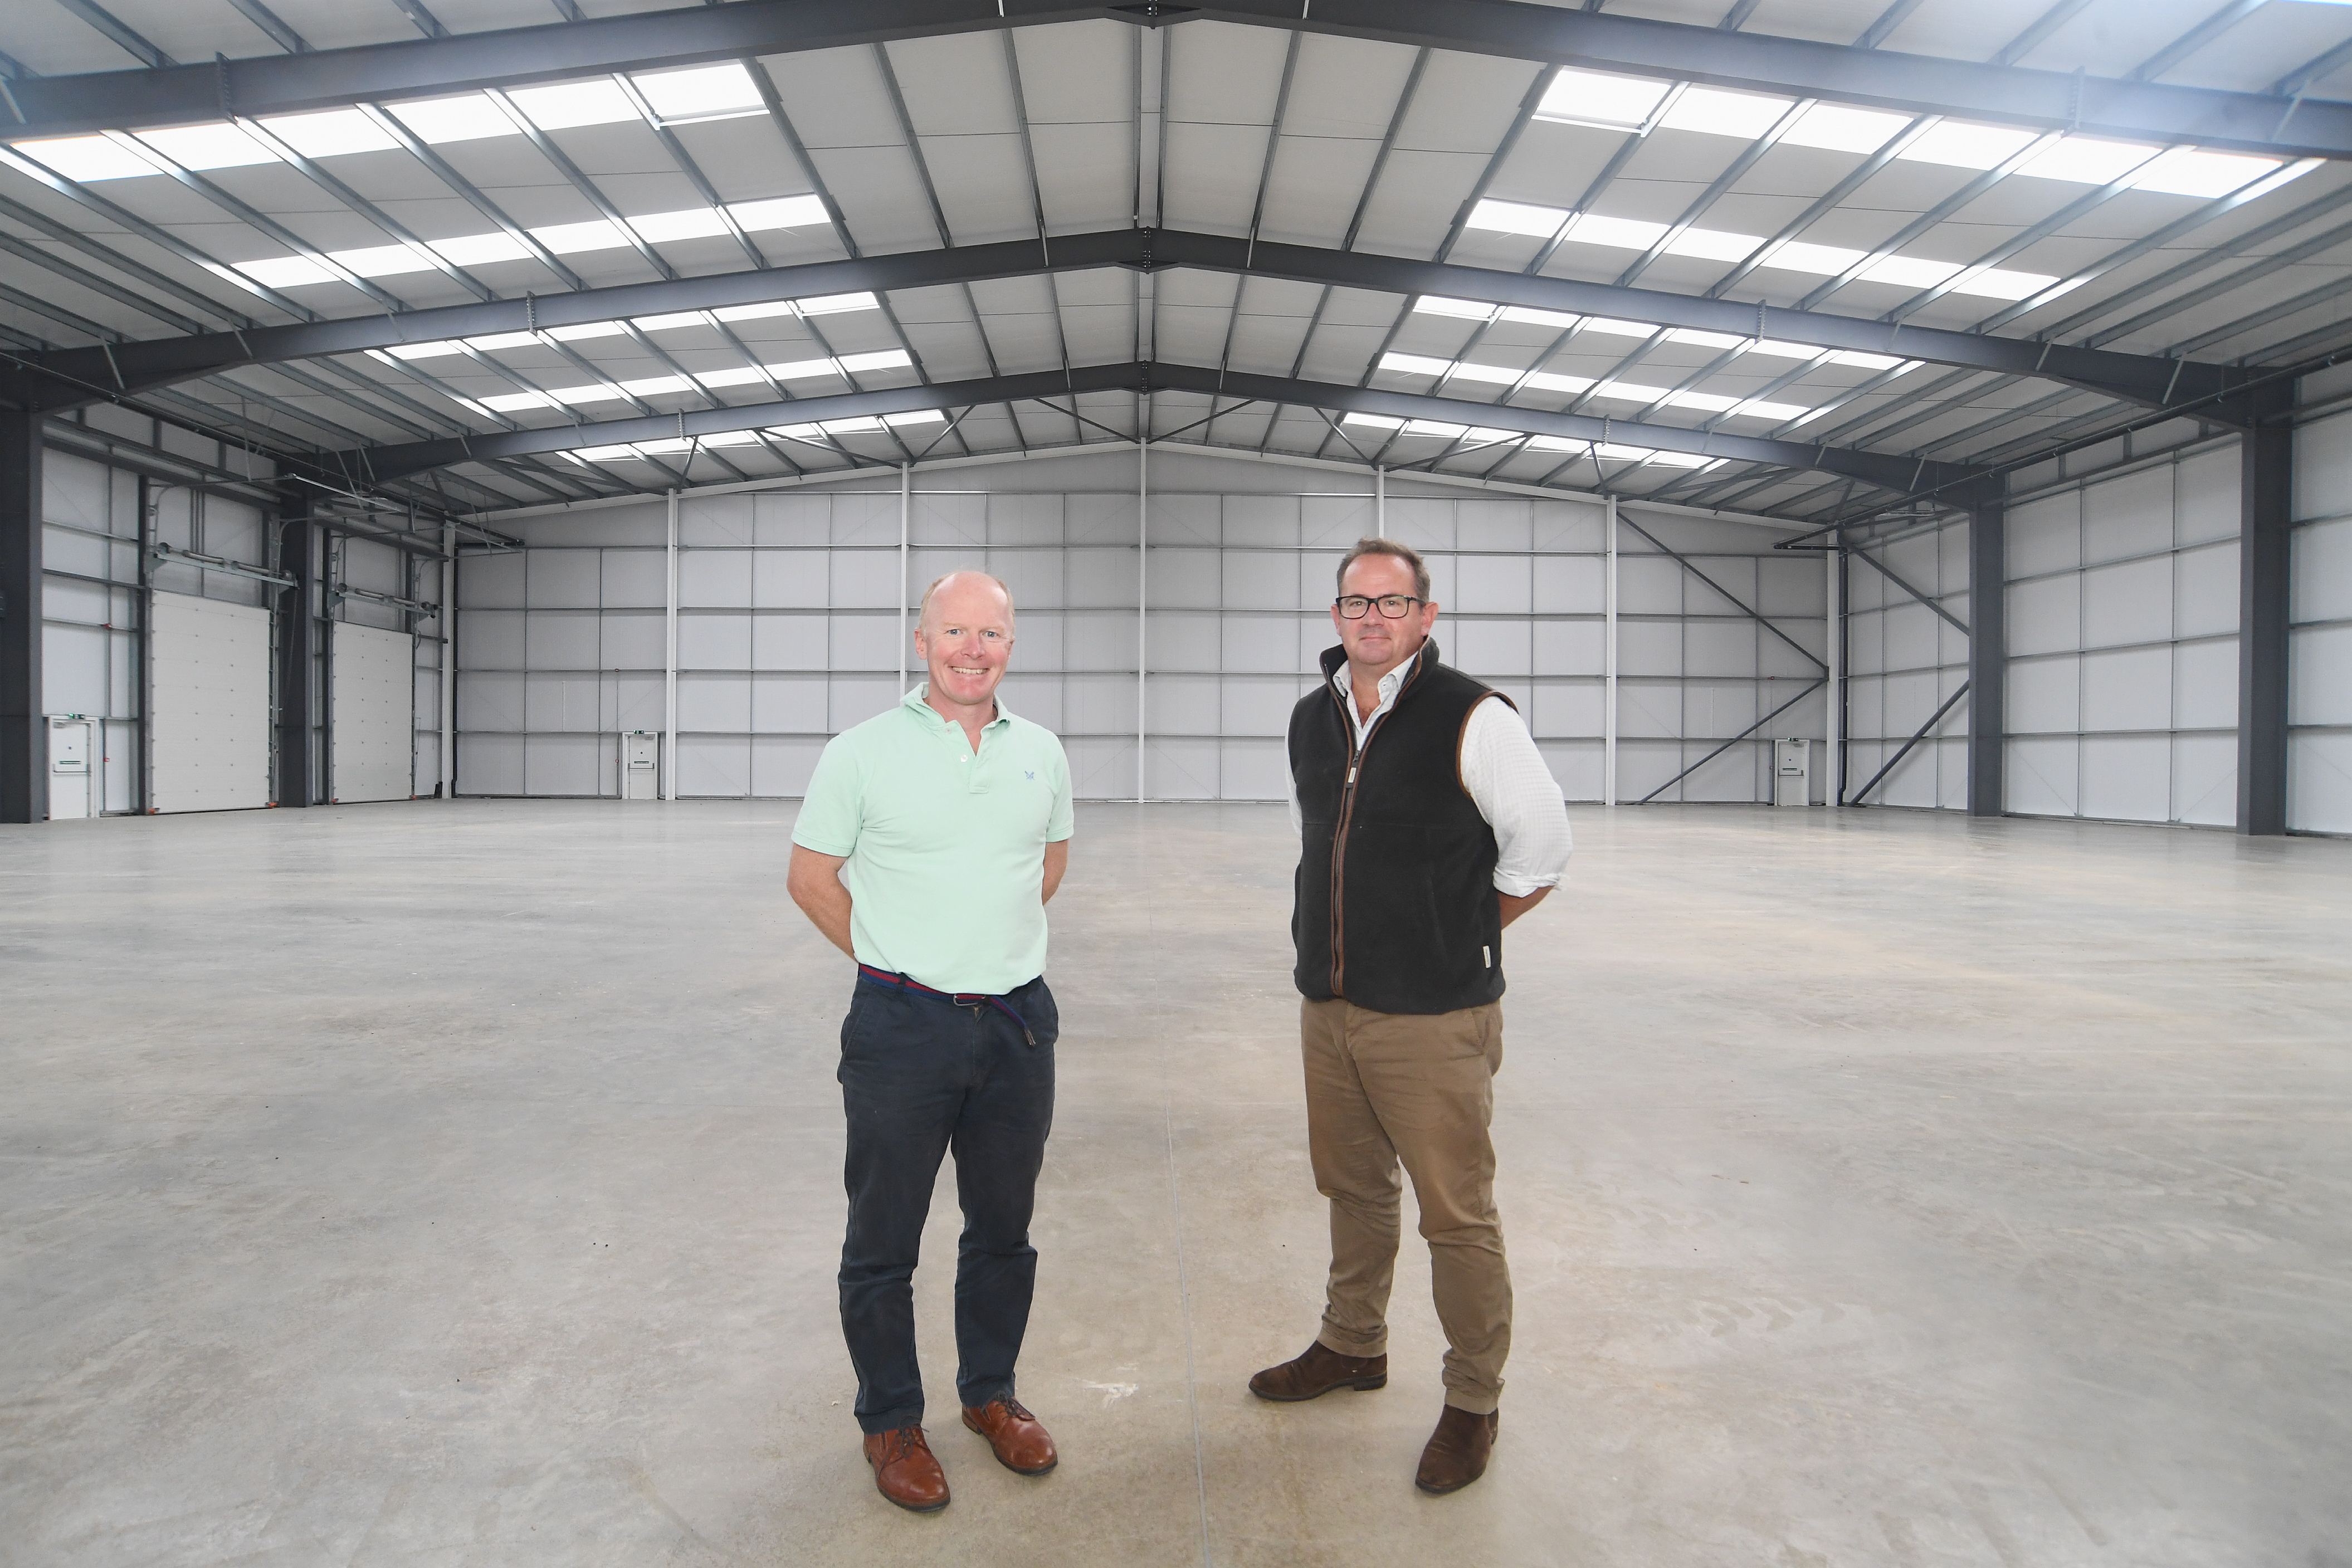 Business centre and self-storage company announces major Midlands expansion